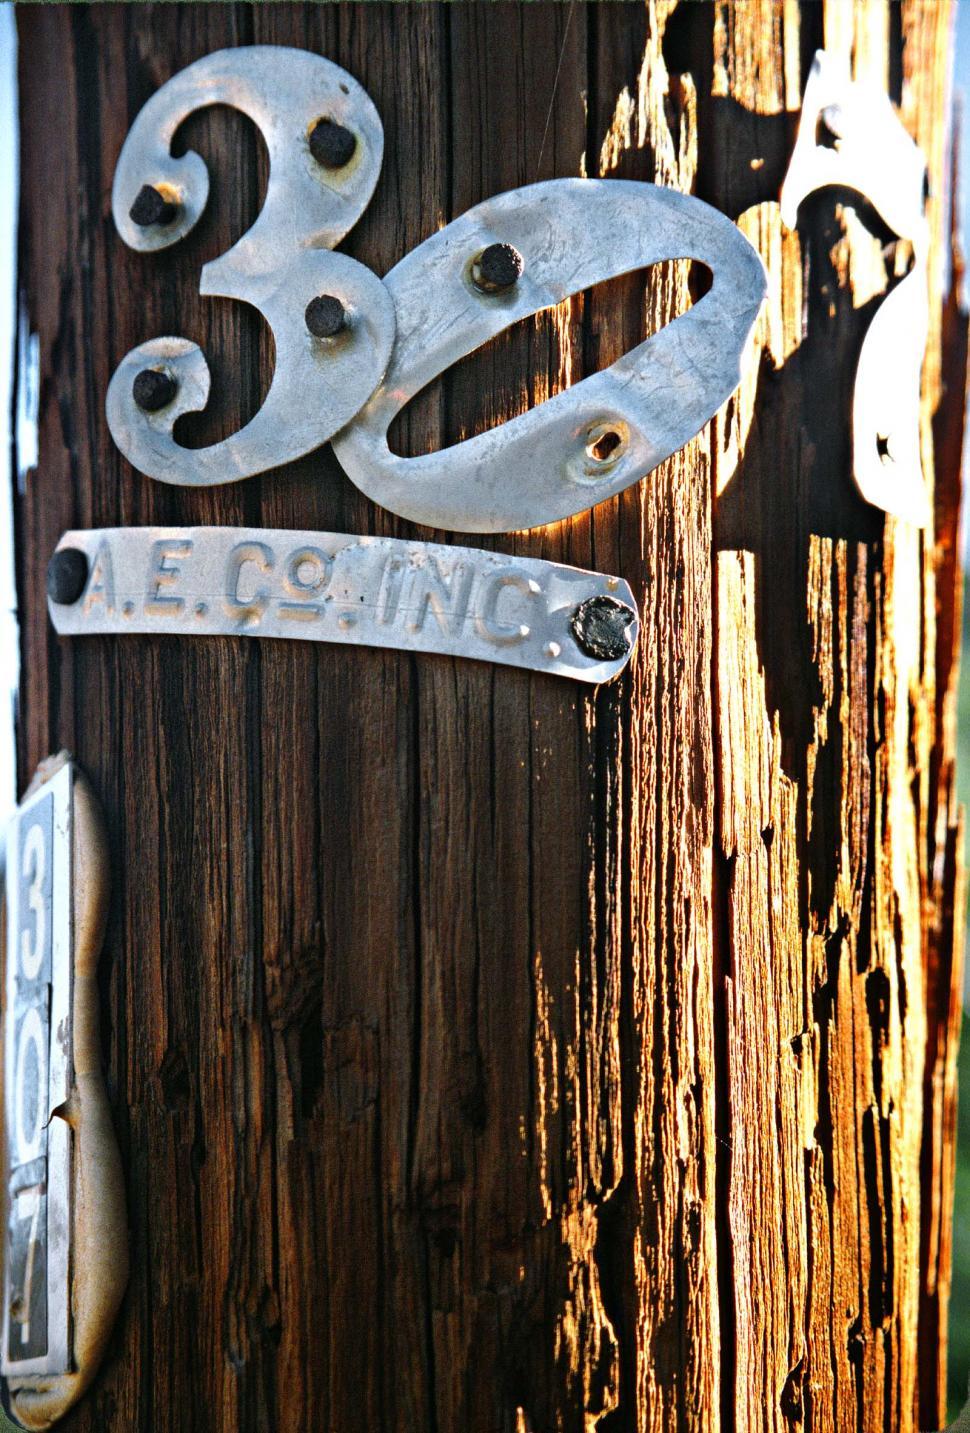 Free Image of Number 307 on wooden pole 